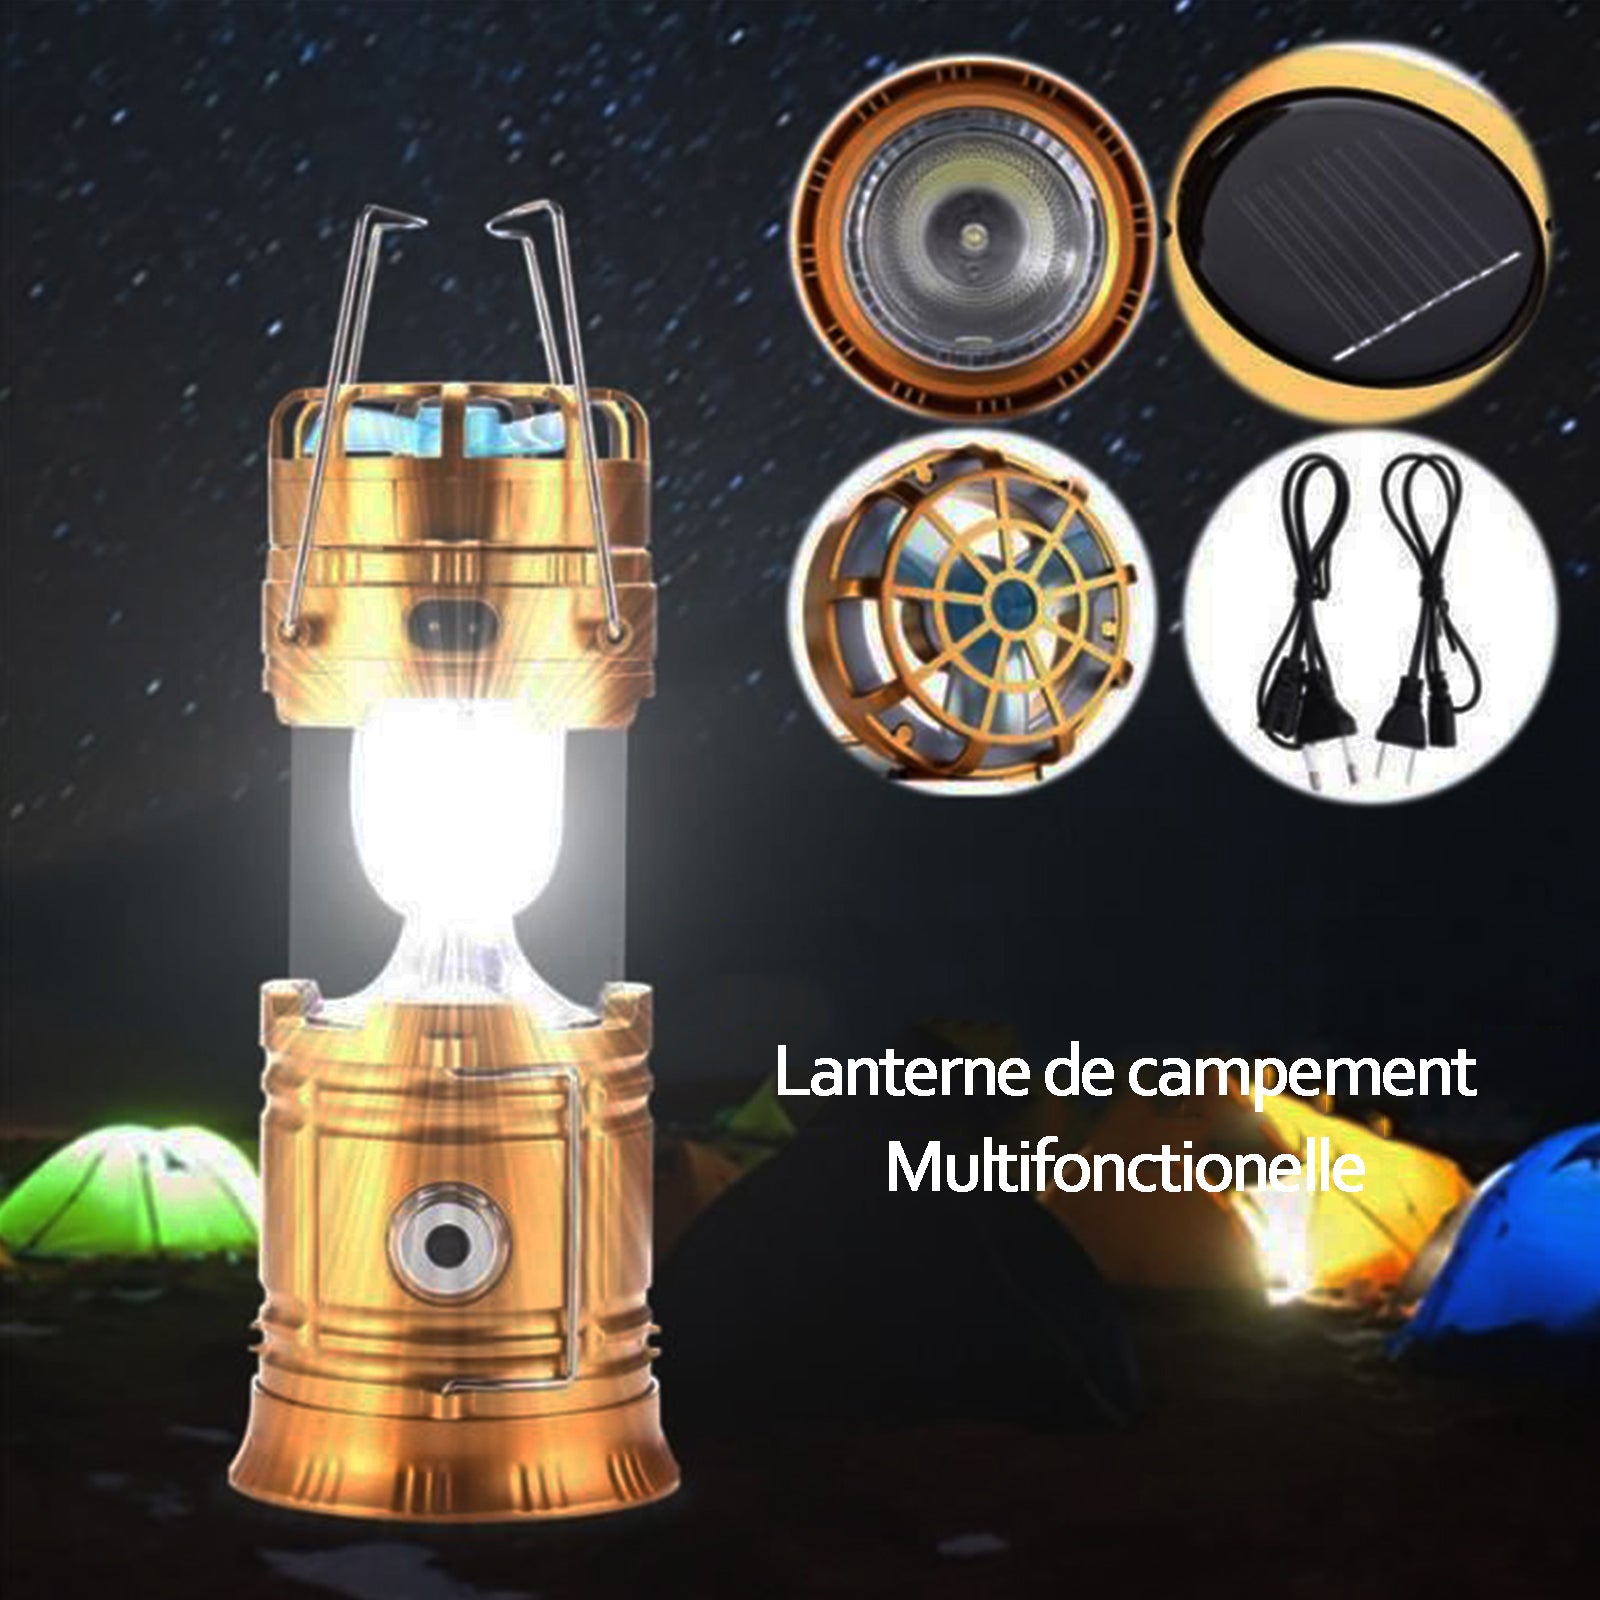 Lampe solaire de camping rechargeable or